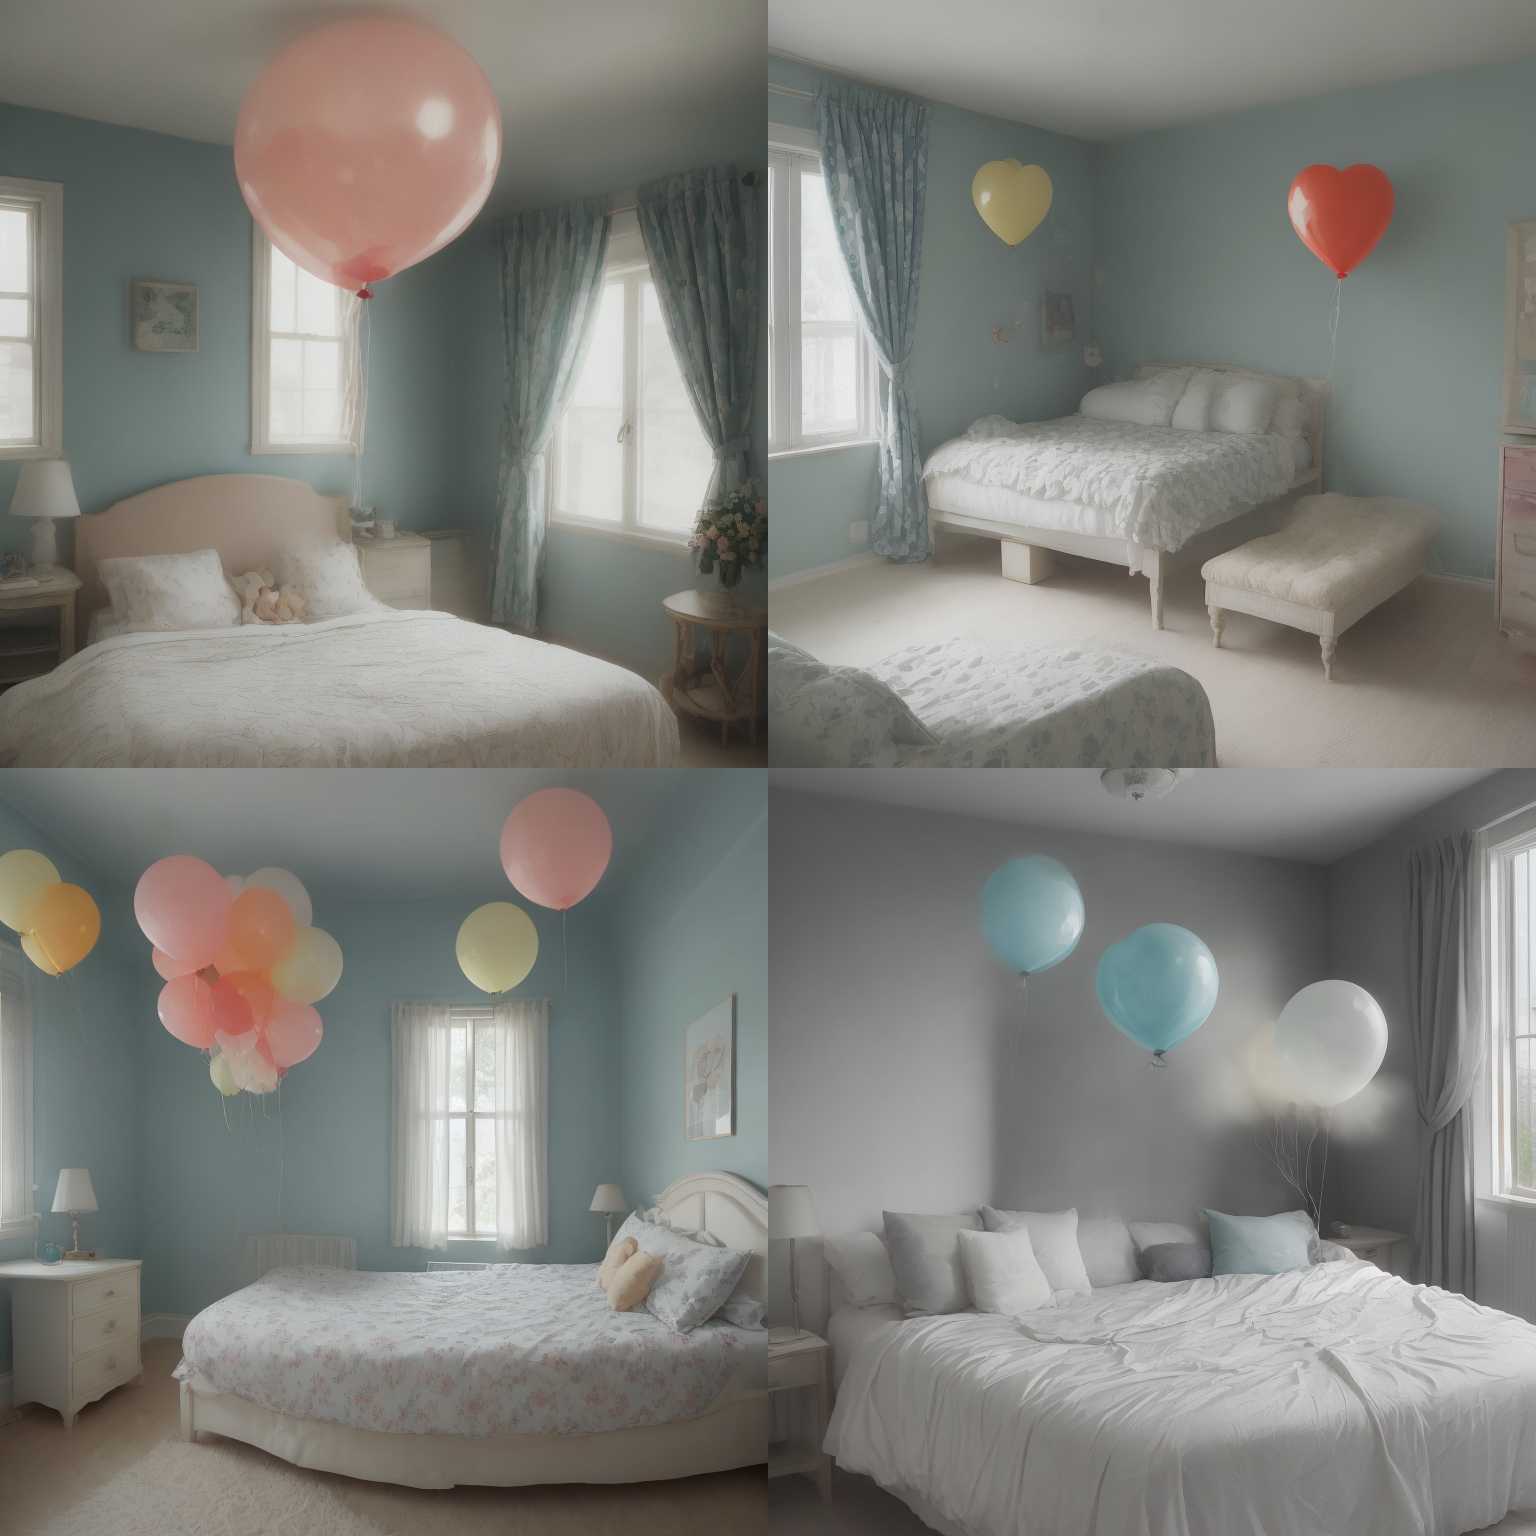 A balloon filled with air in the bedroom